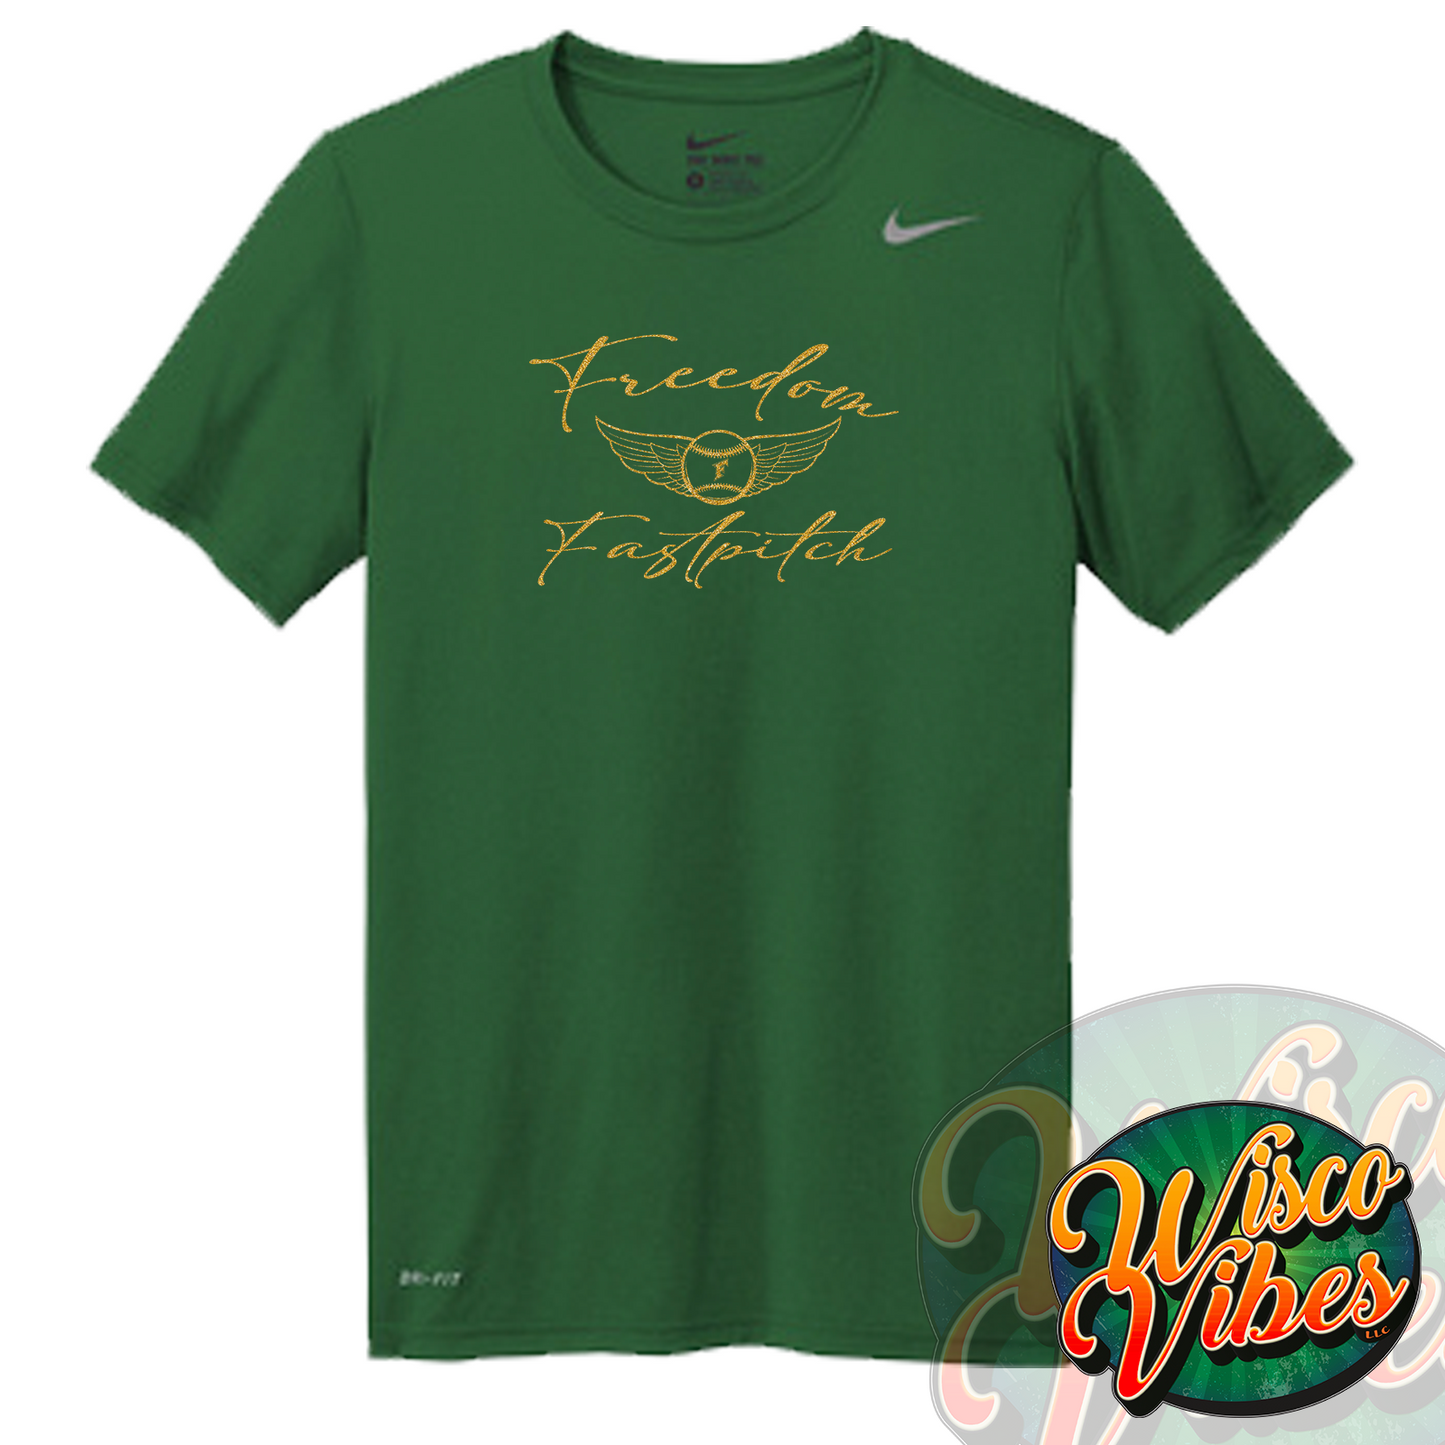 Nike Freedom Freedom Fastpitch Wings T-Shirt